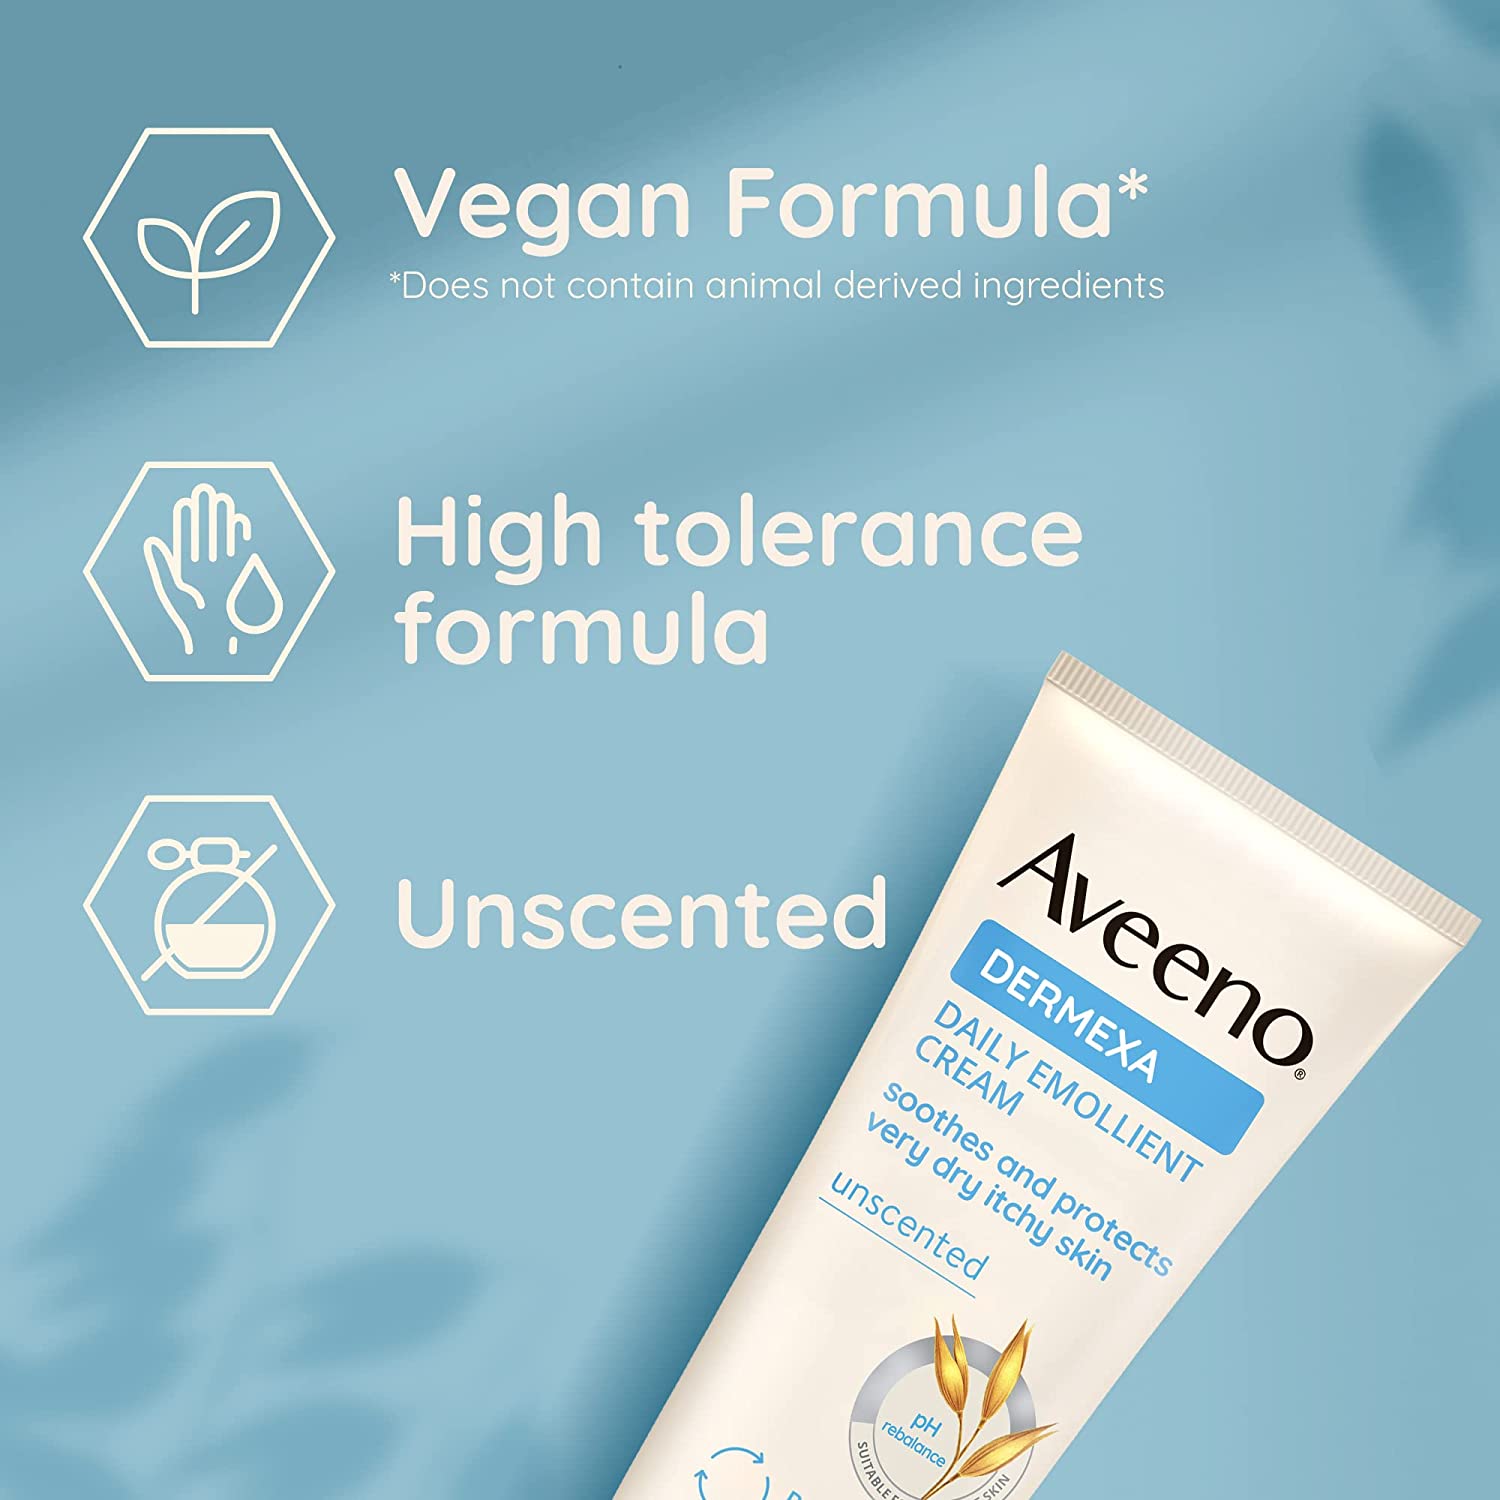 Aveeno Dermexa Daily Emollient Cream for very dry itchy skin 200 ml - Healthxpress.ie